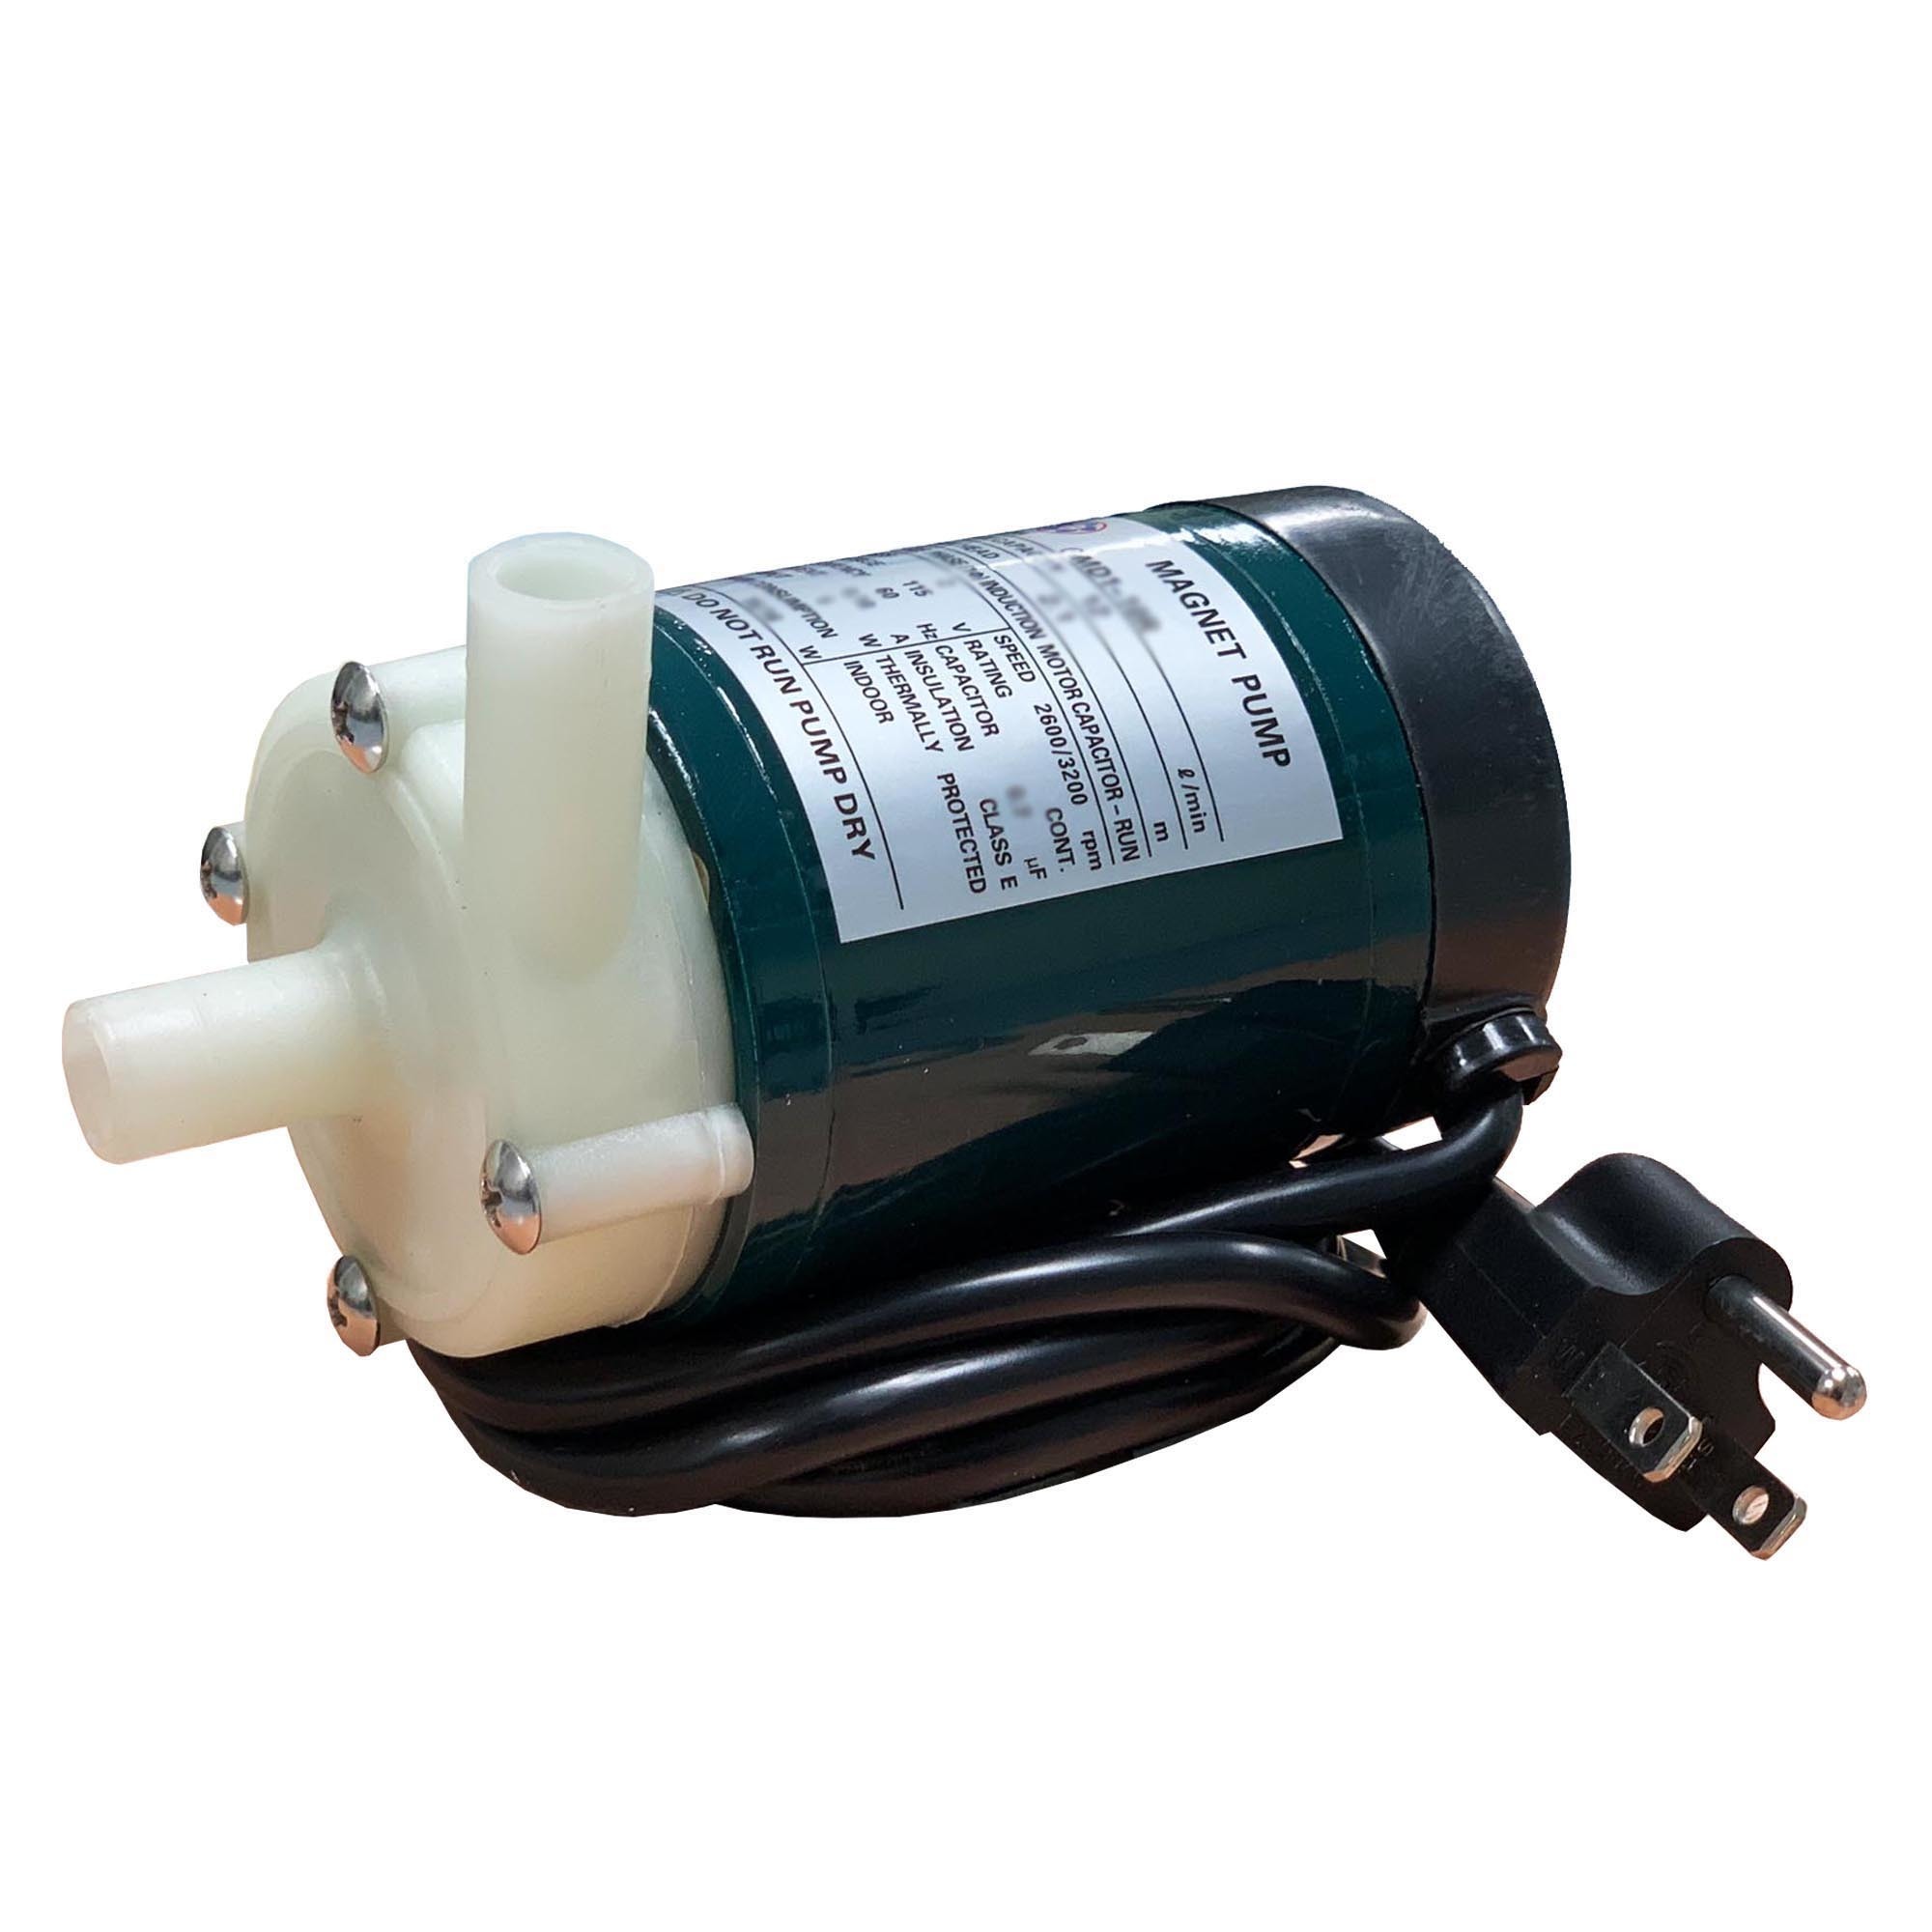 Gol Pumps Chemical Magnet Pump GMD1-6R, 115V, 45GPH, Max. Flow 120 GPH, Port Size 0.5 in, Volts 115, Model GMD1-6R